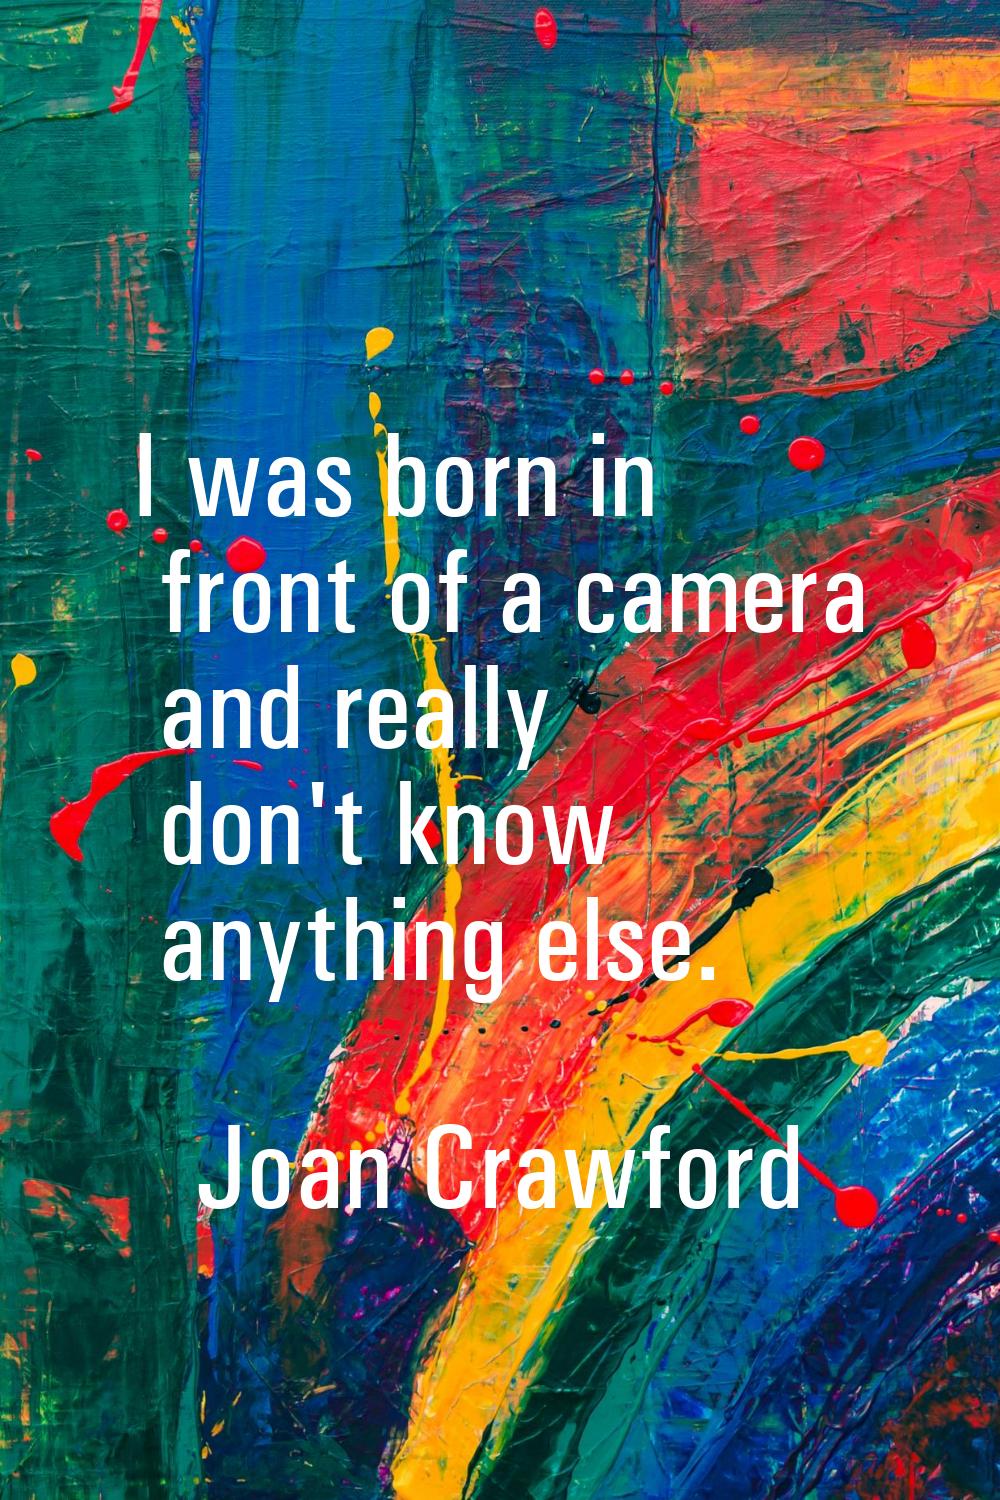 I was born in front of a camera and really don't know anything else.